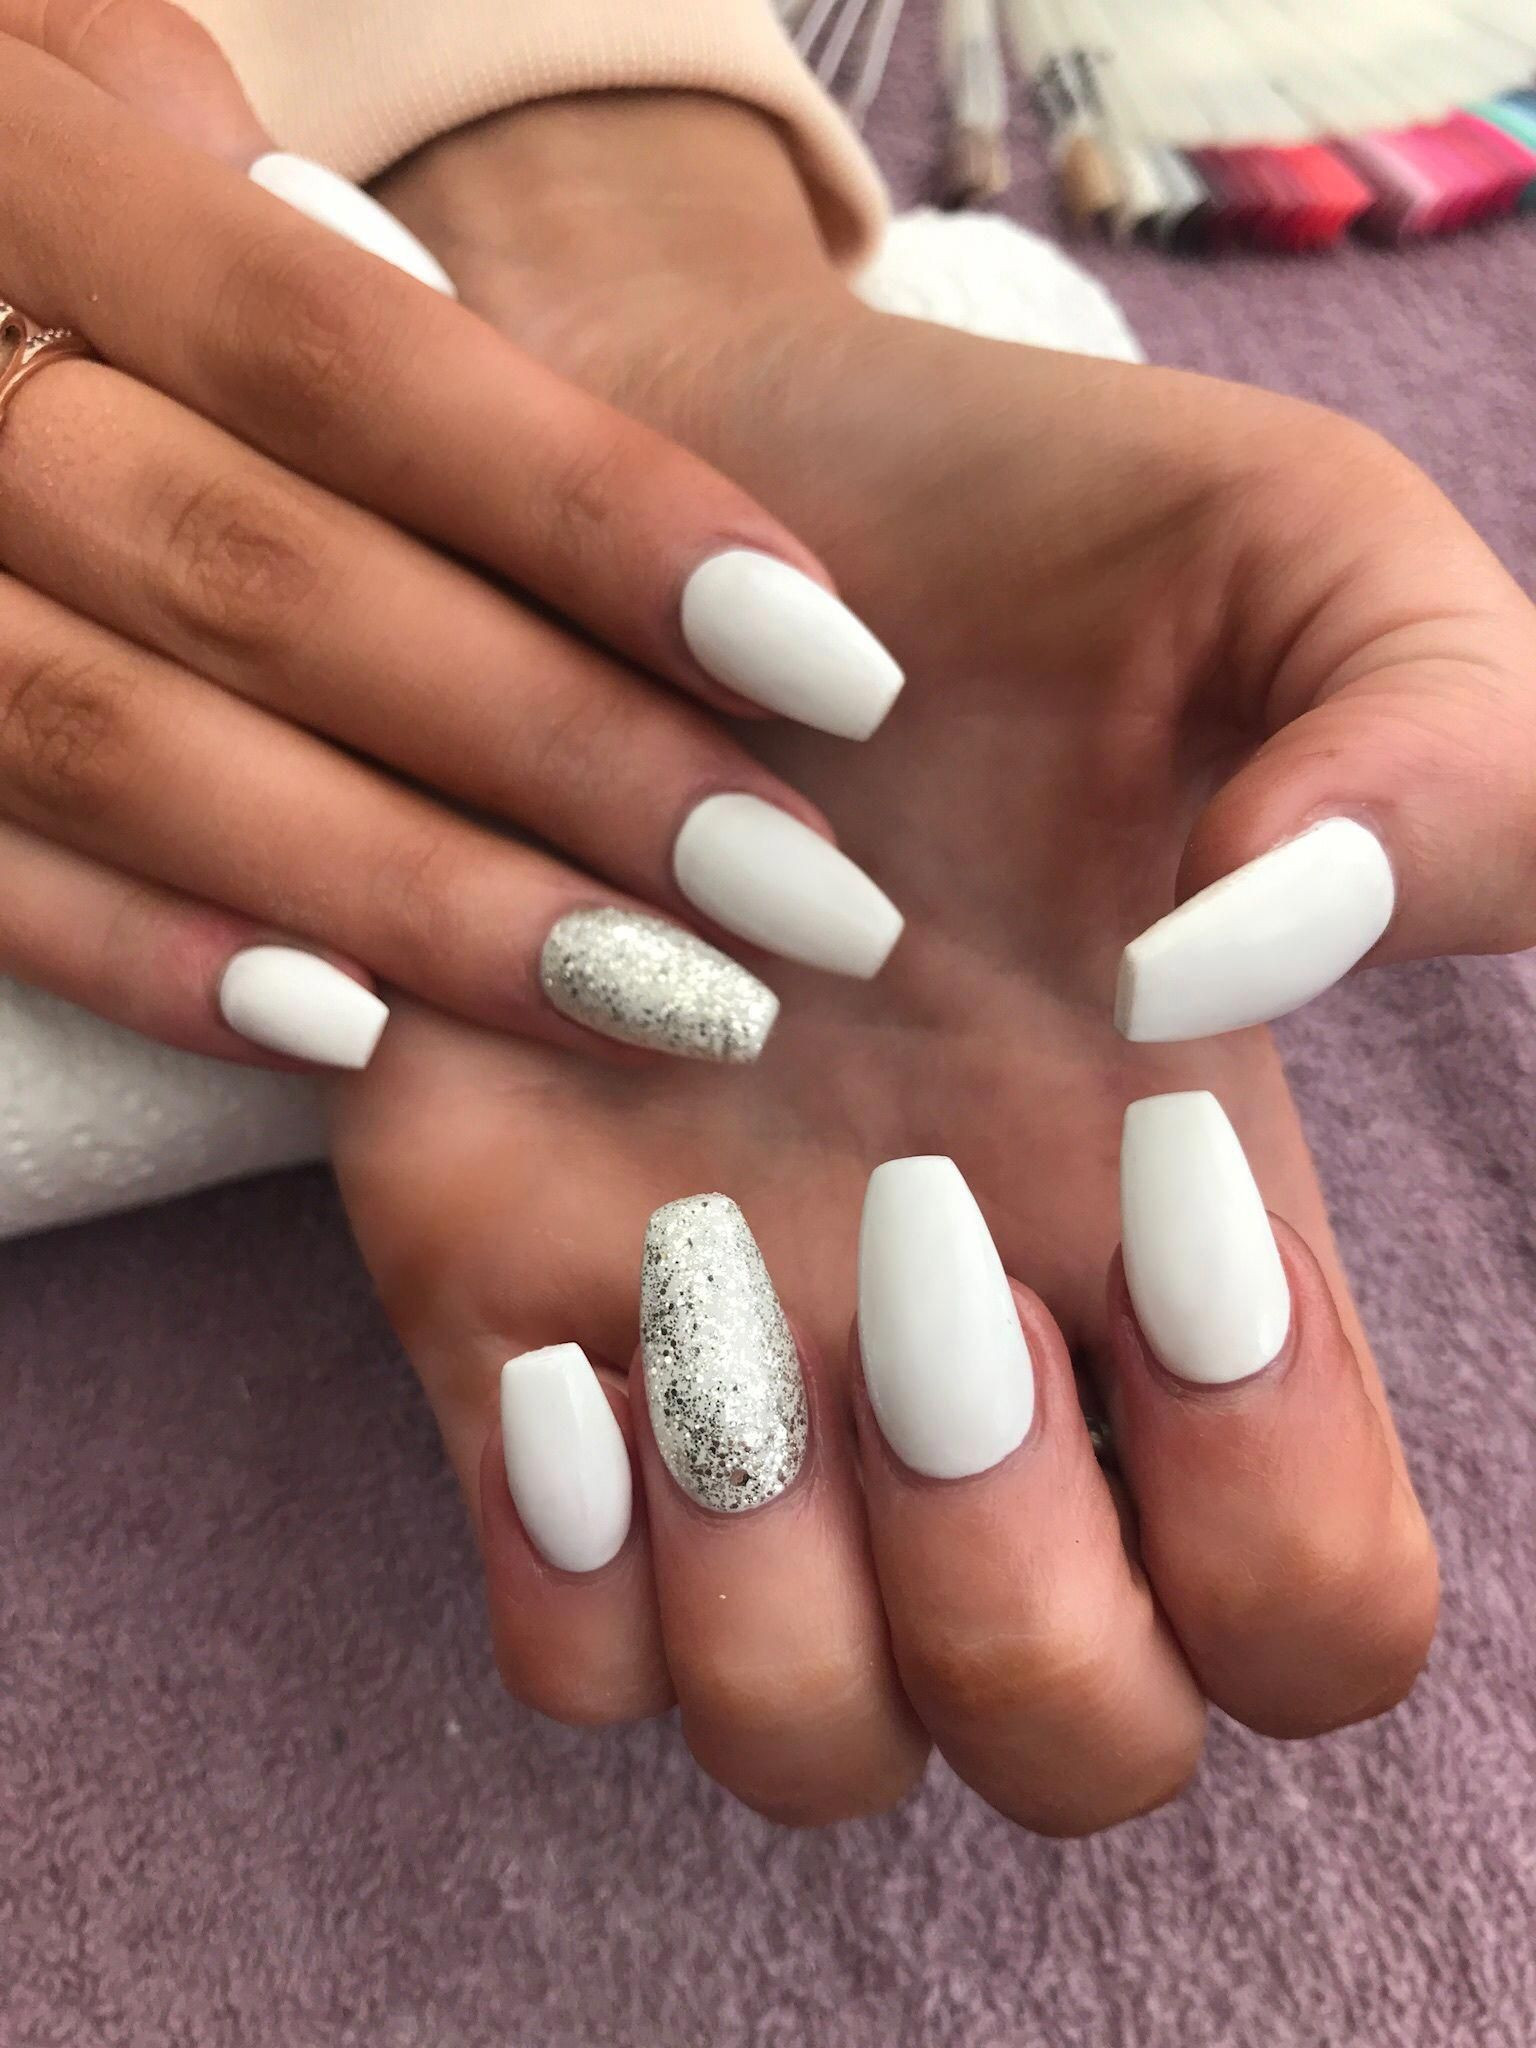 White And Silver Glitter Nails
 White coffin shaped acrylic nails with silver glitter